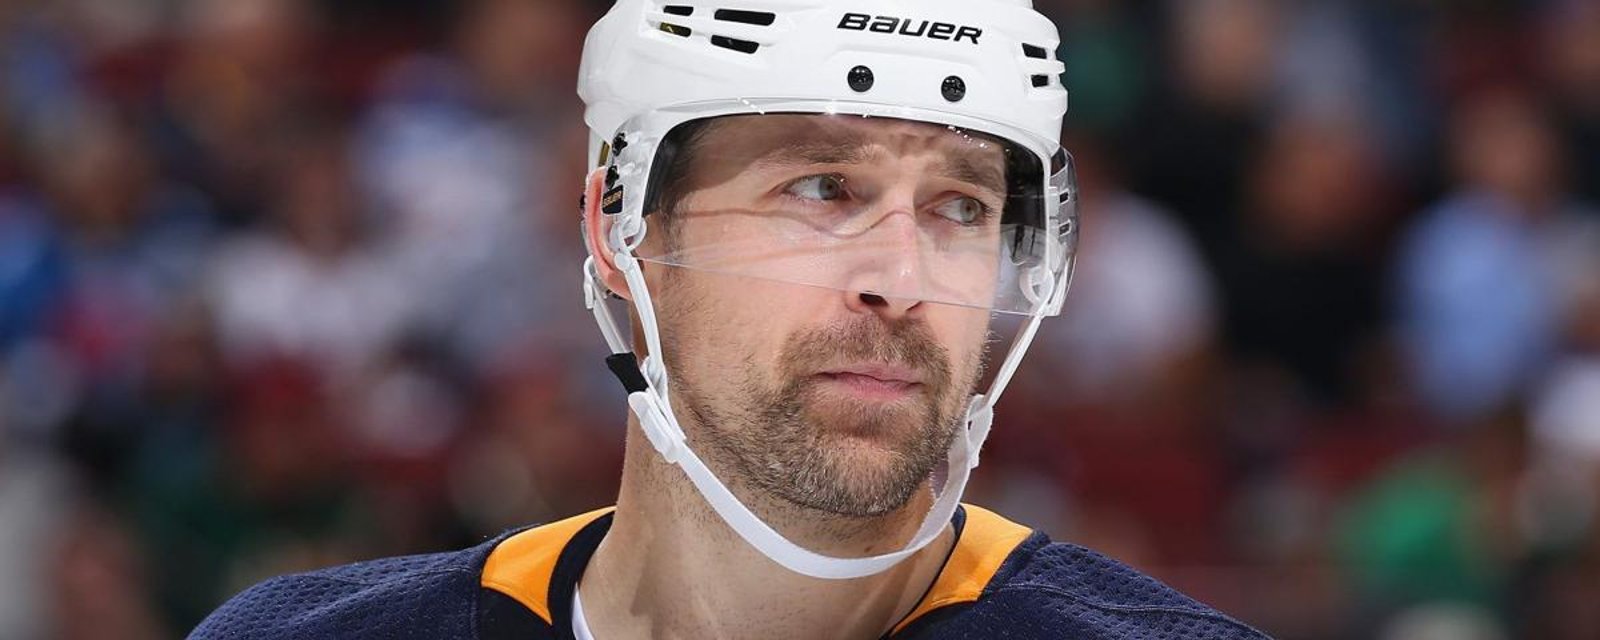 Patrik Berglund arrested on charges of assault and rape